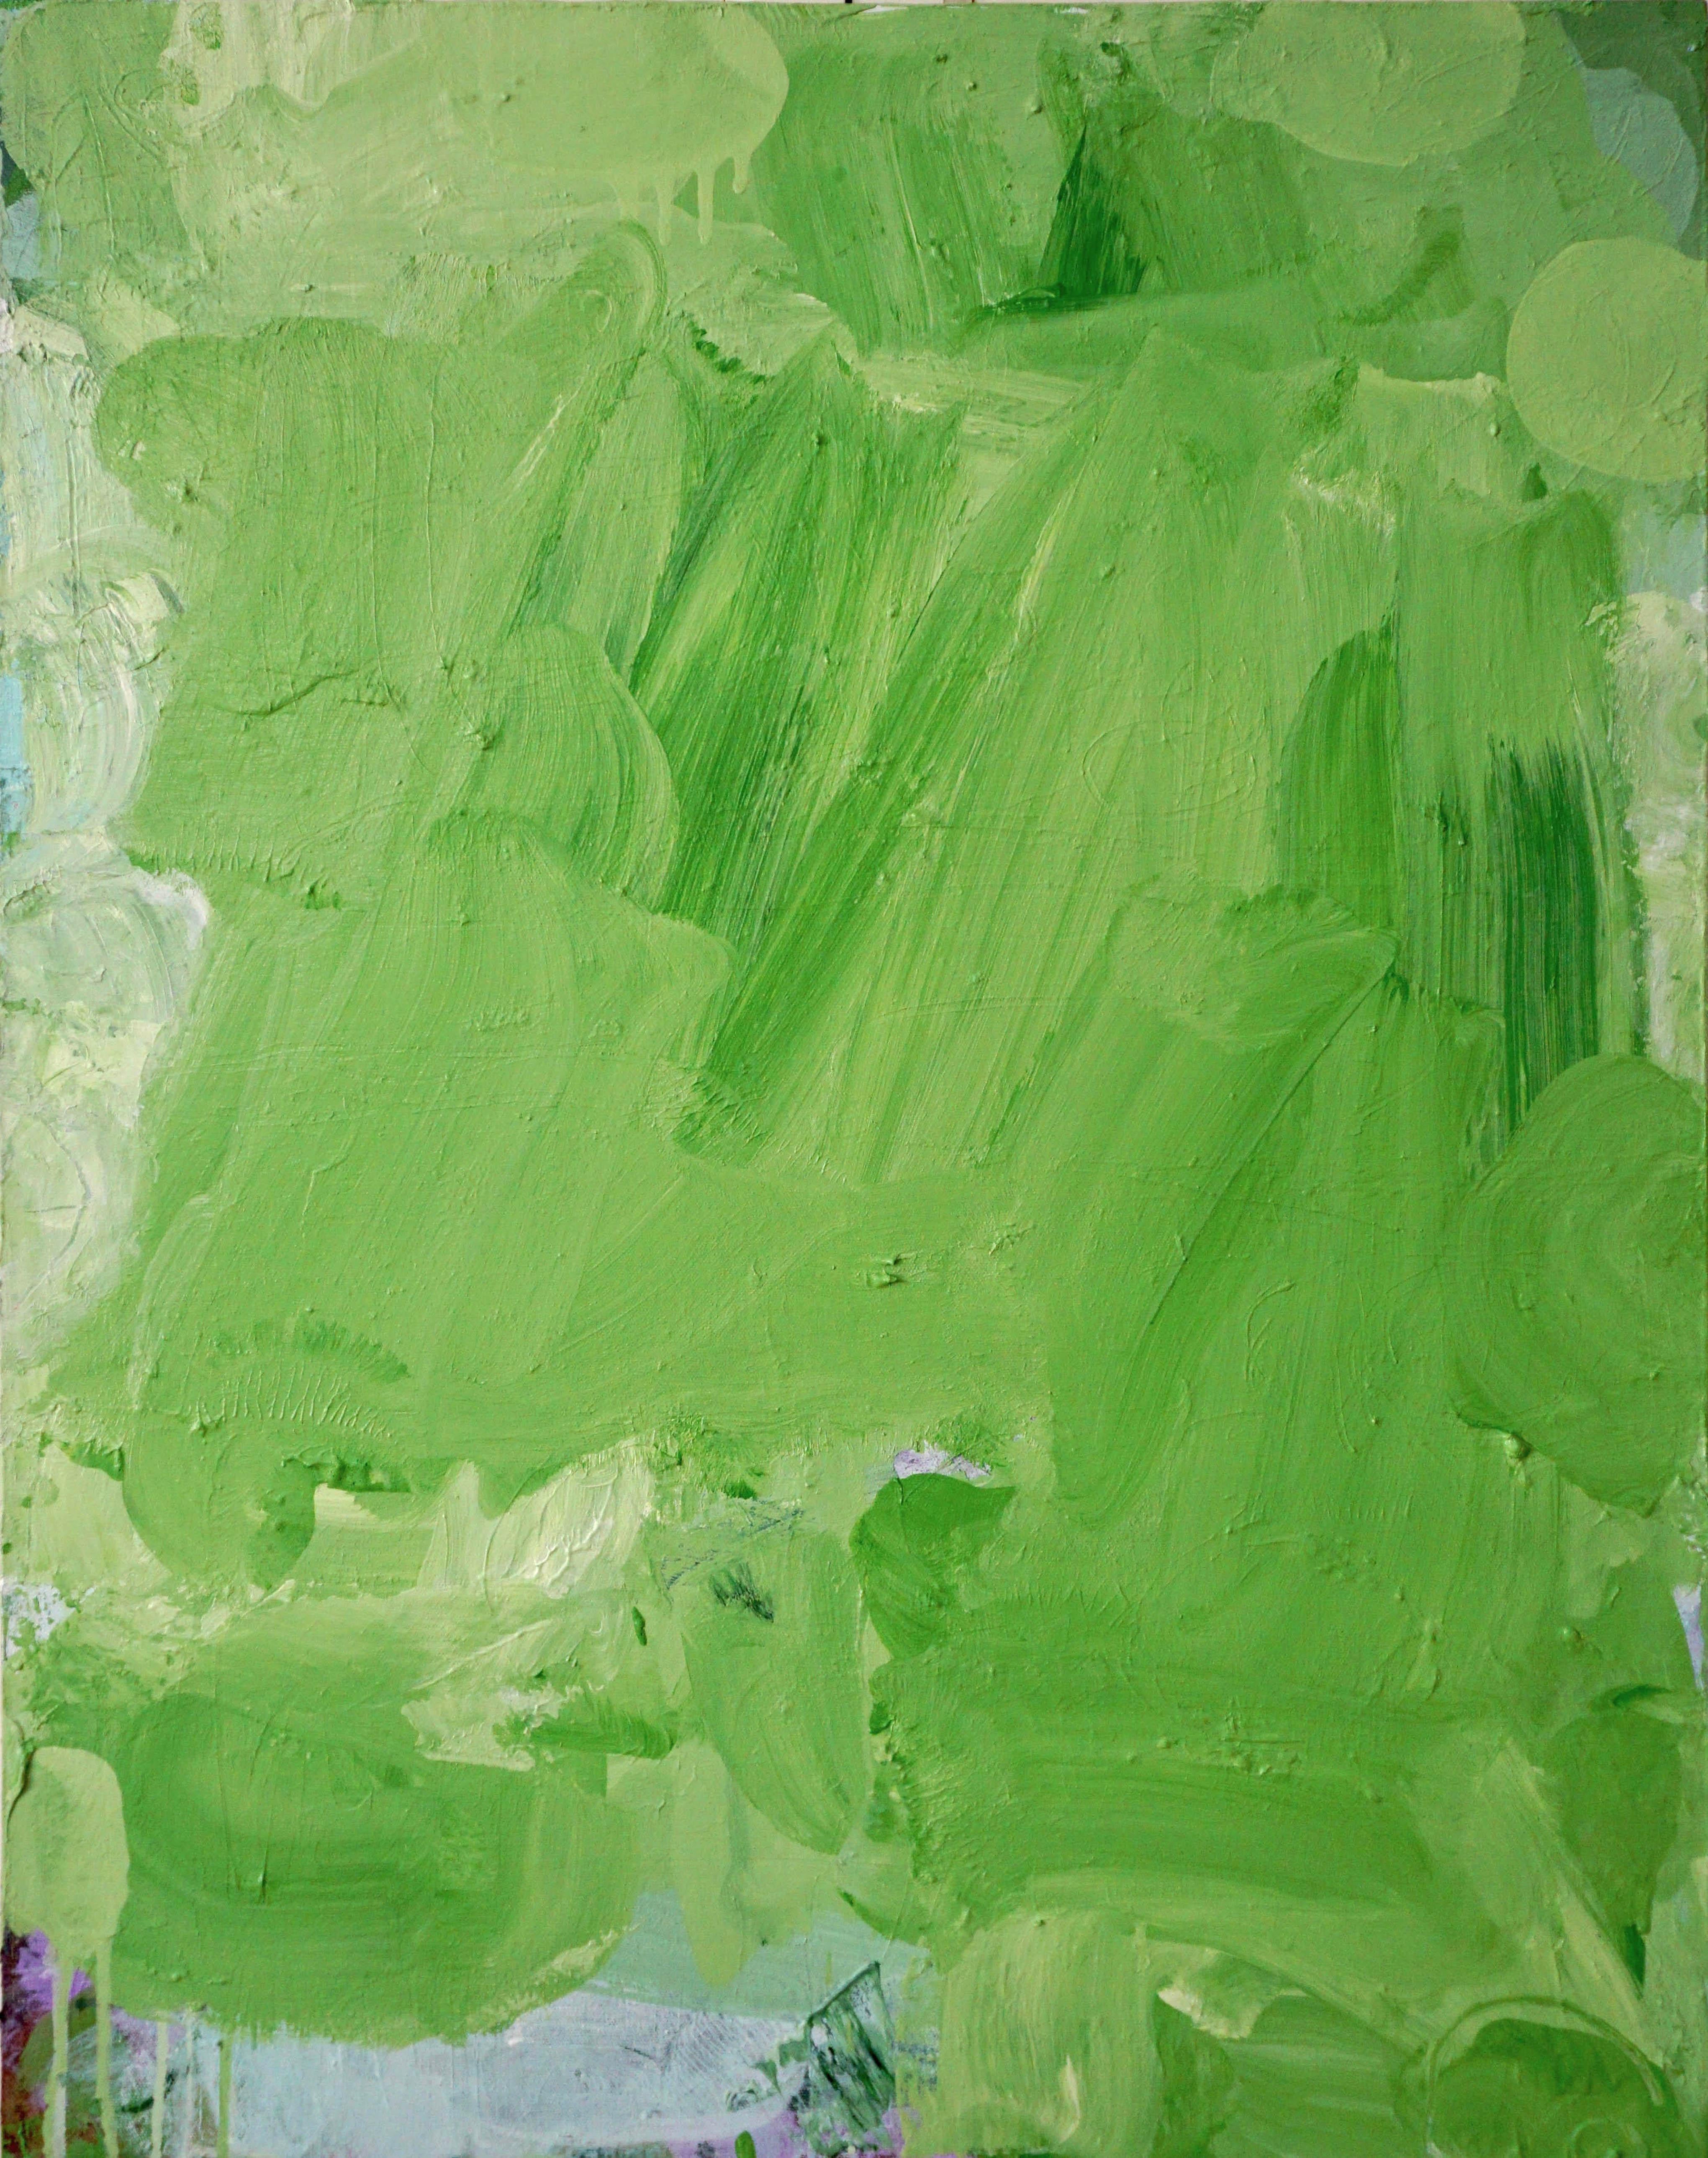 Abstract Painting Lisa Fellerson - Time for Lime, peinture expressionniste abstraite vert vif sur toile